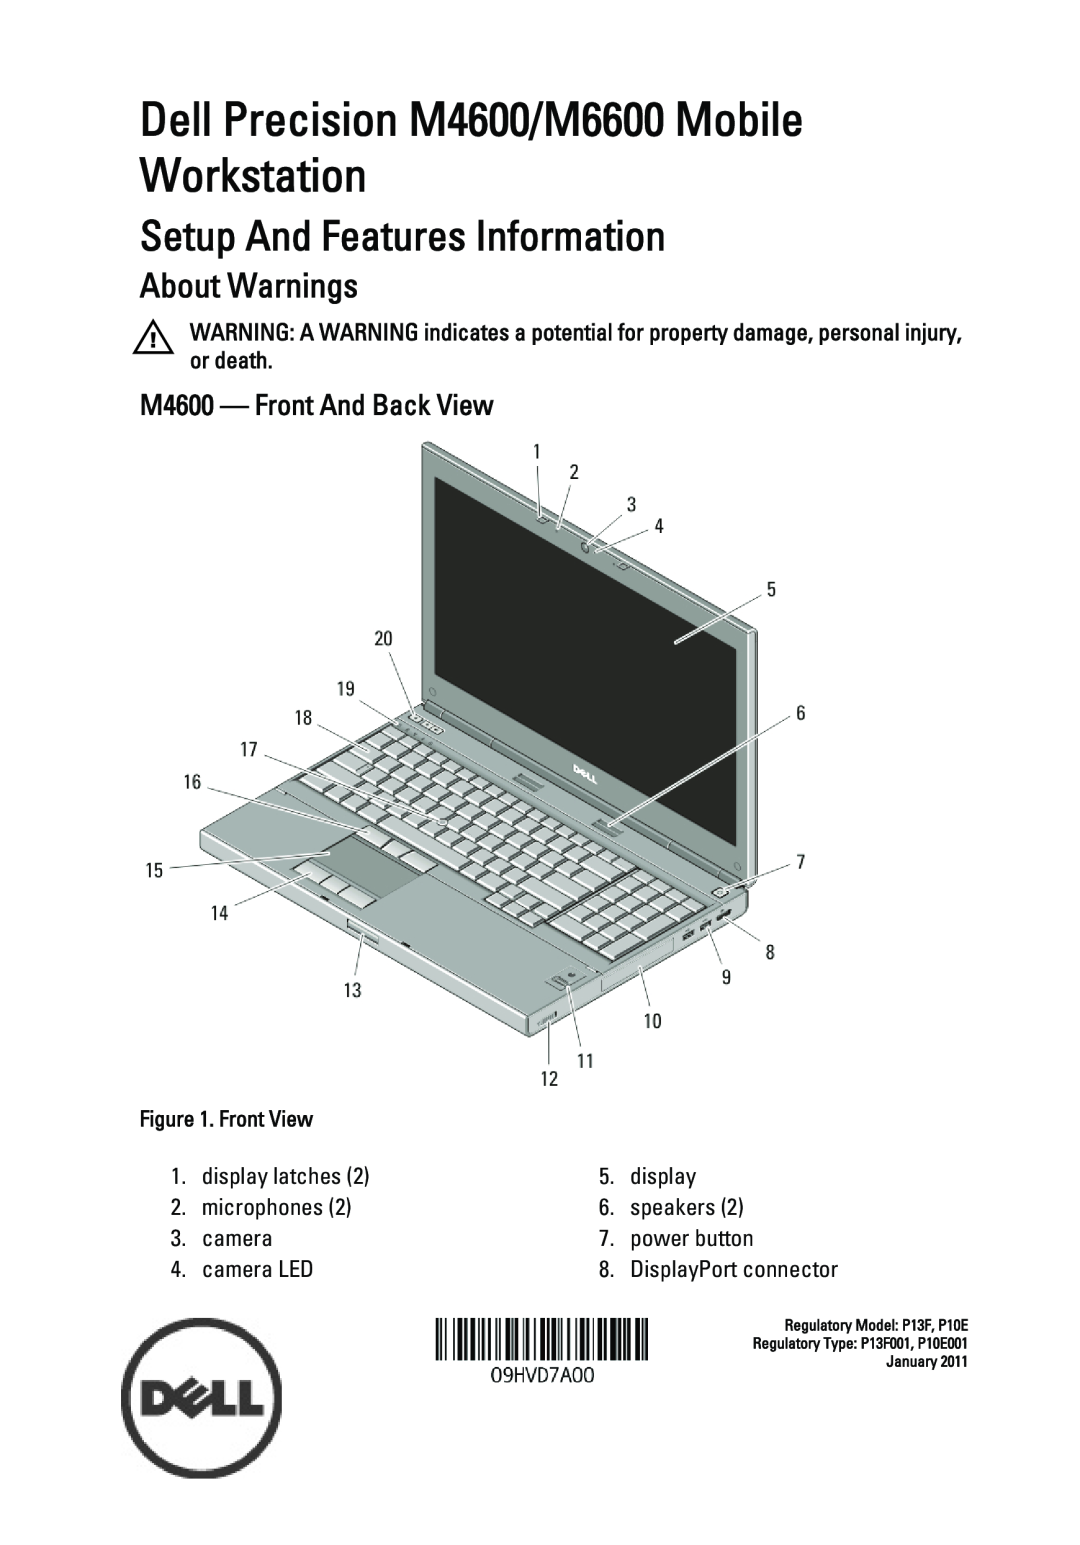 Dell manual M4600 - Front And Back View, Dell Precision M4600/M6600 Mobile Workstation, Setup And Features Information 